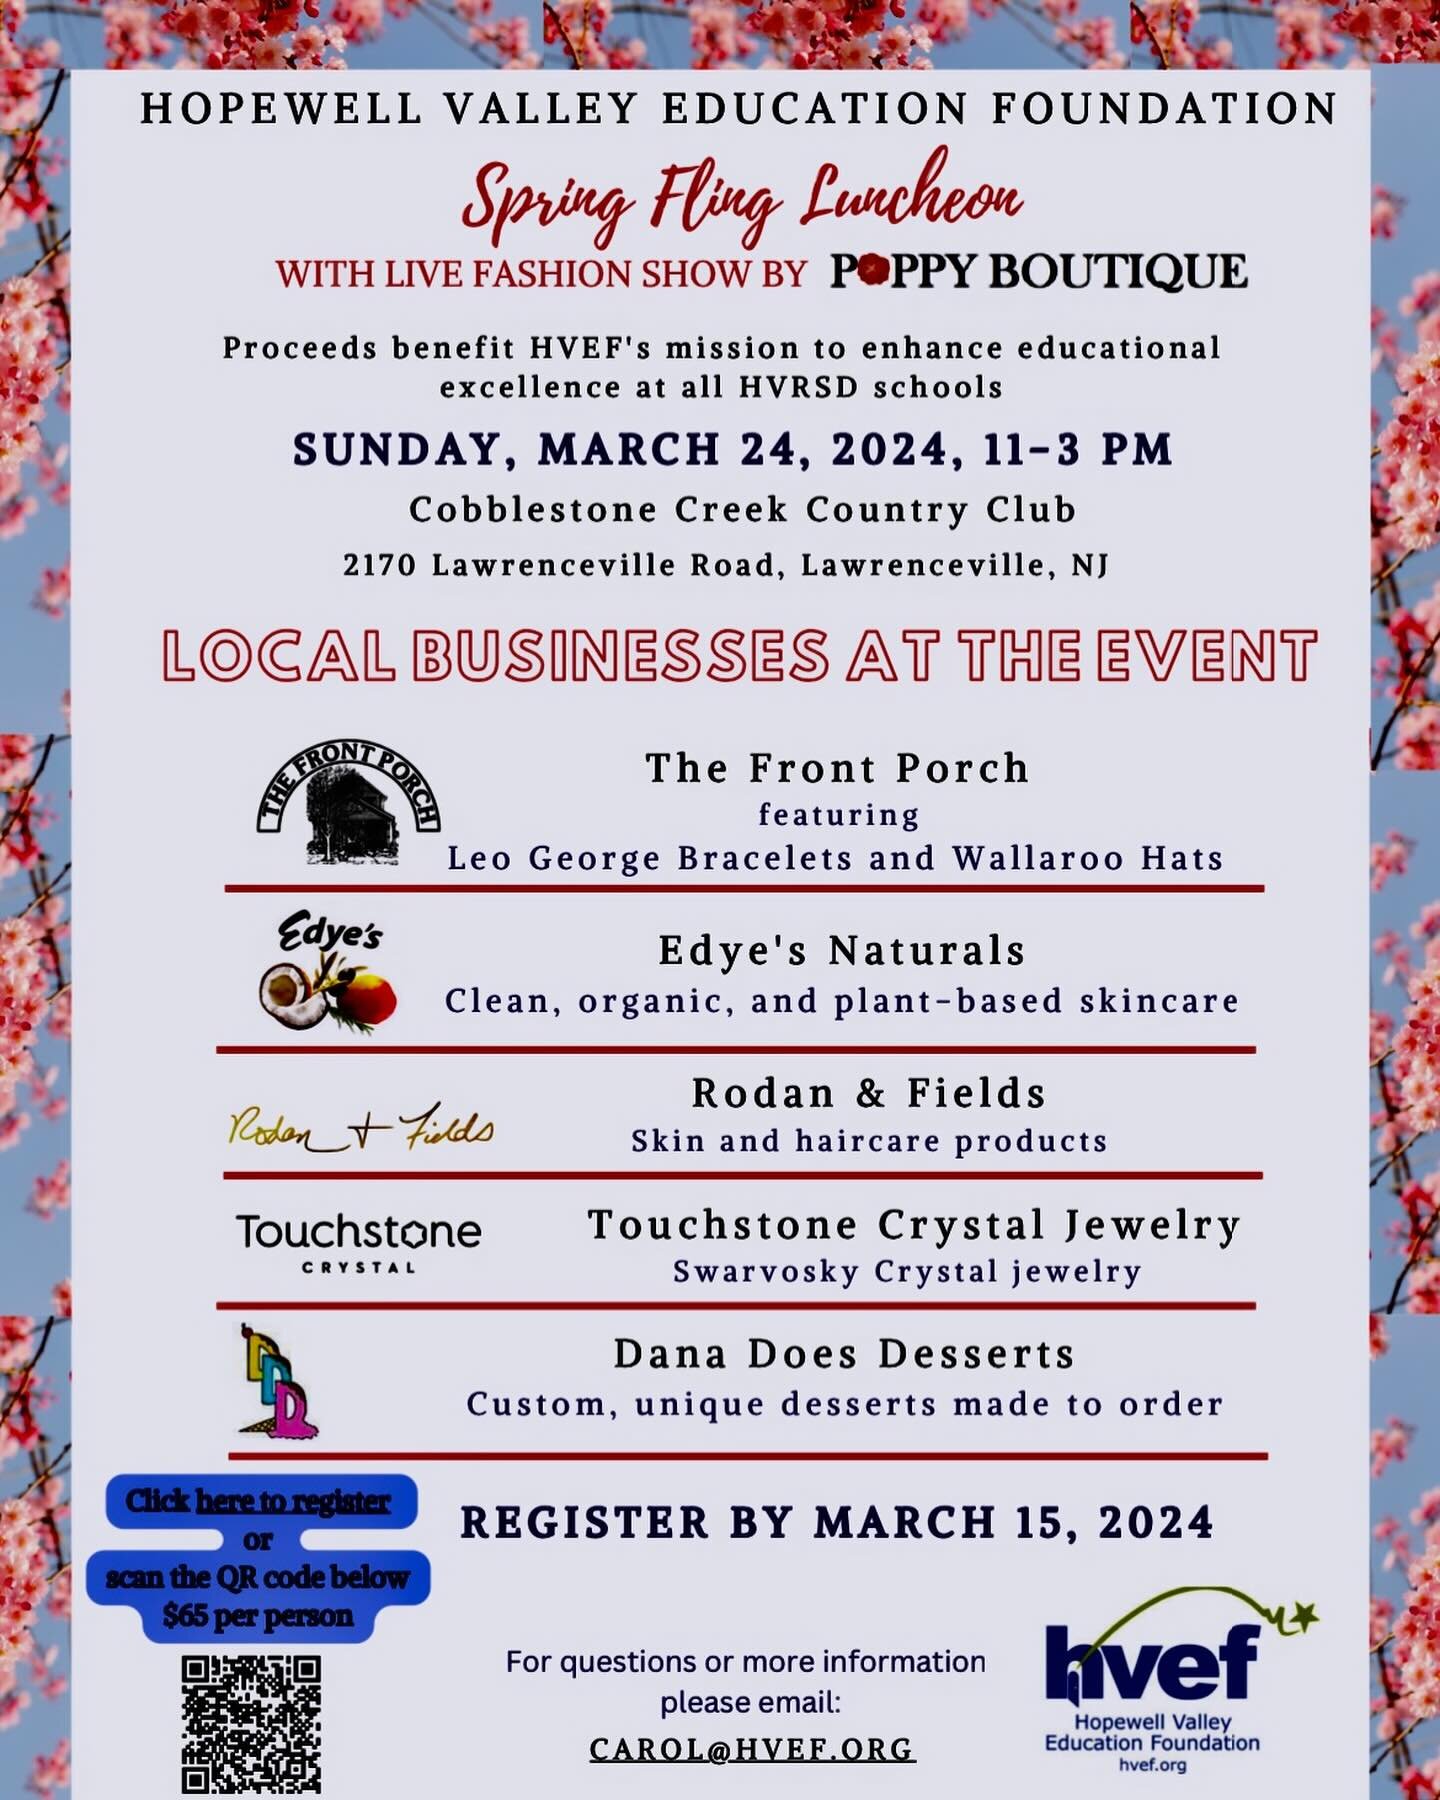 Please join us for a Spring Fling Fashion Show in support of the Hopewell Valley Education Foundation! All the new Spring styles presented in a high energy setting with beautiful local models- plus a delicious luncheon and a Pop Up Boutique with lots